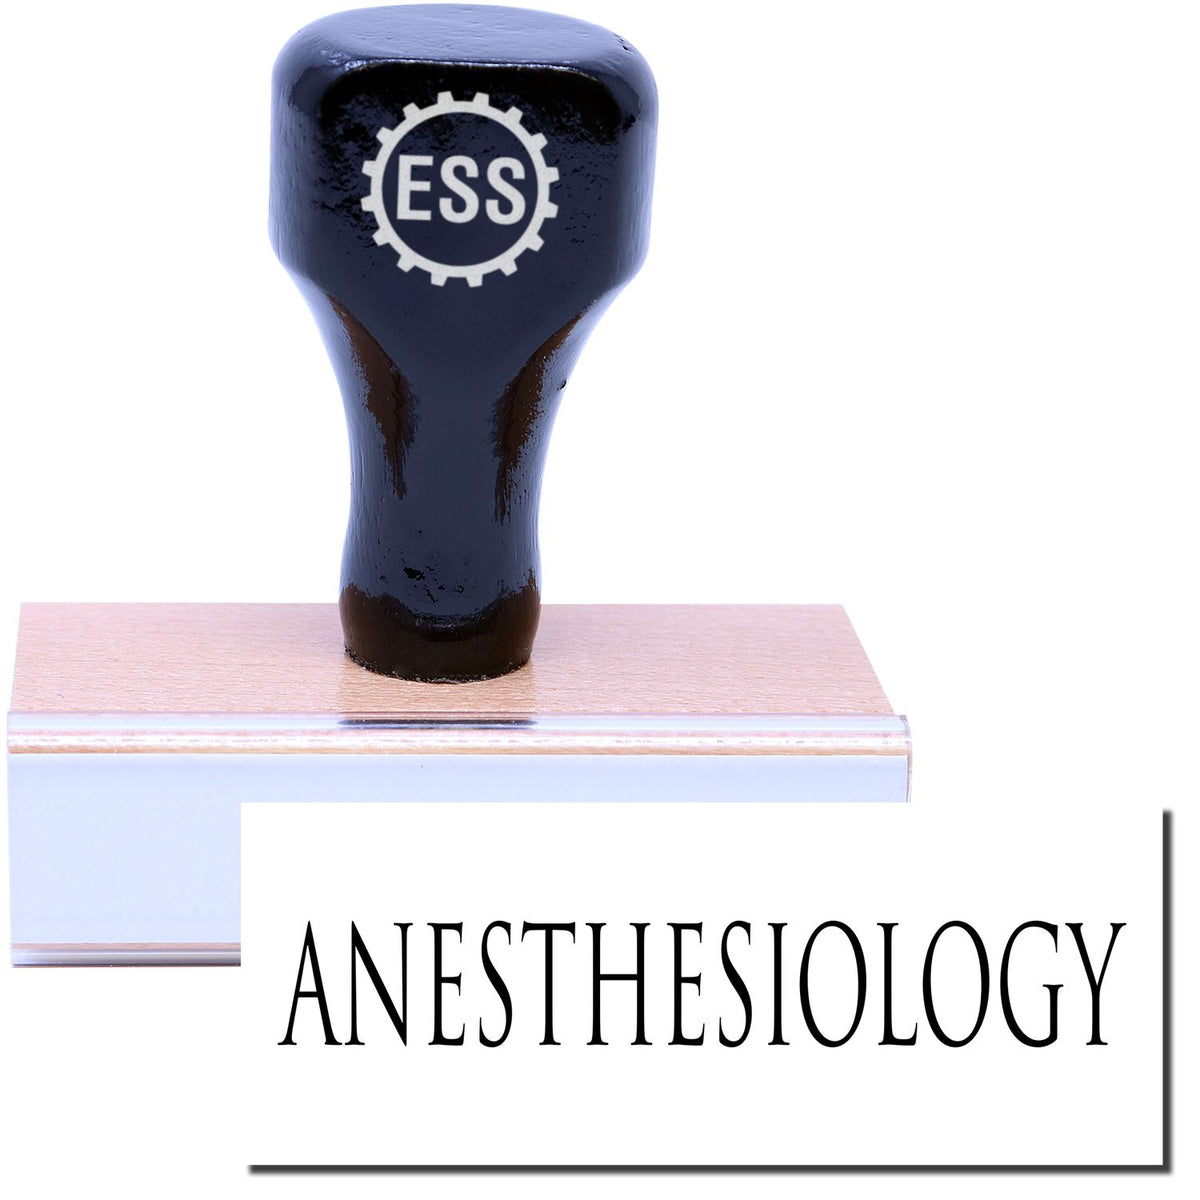 A stock office medical rubber stamp with a stamped image showing how the text &quot;ANESTHESIOLOGY&quot; is displayed after stamping.